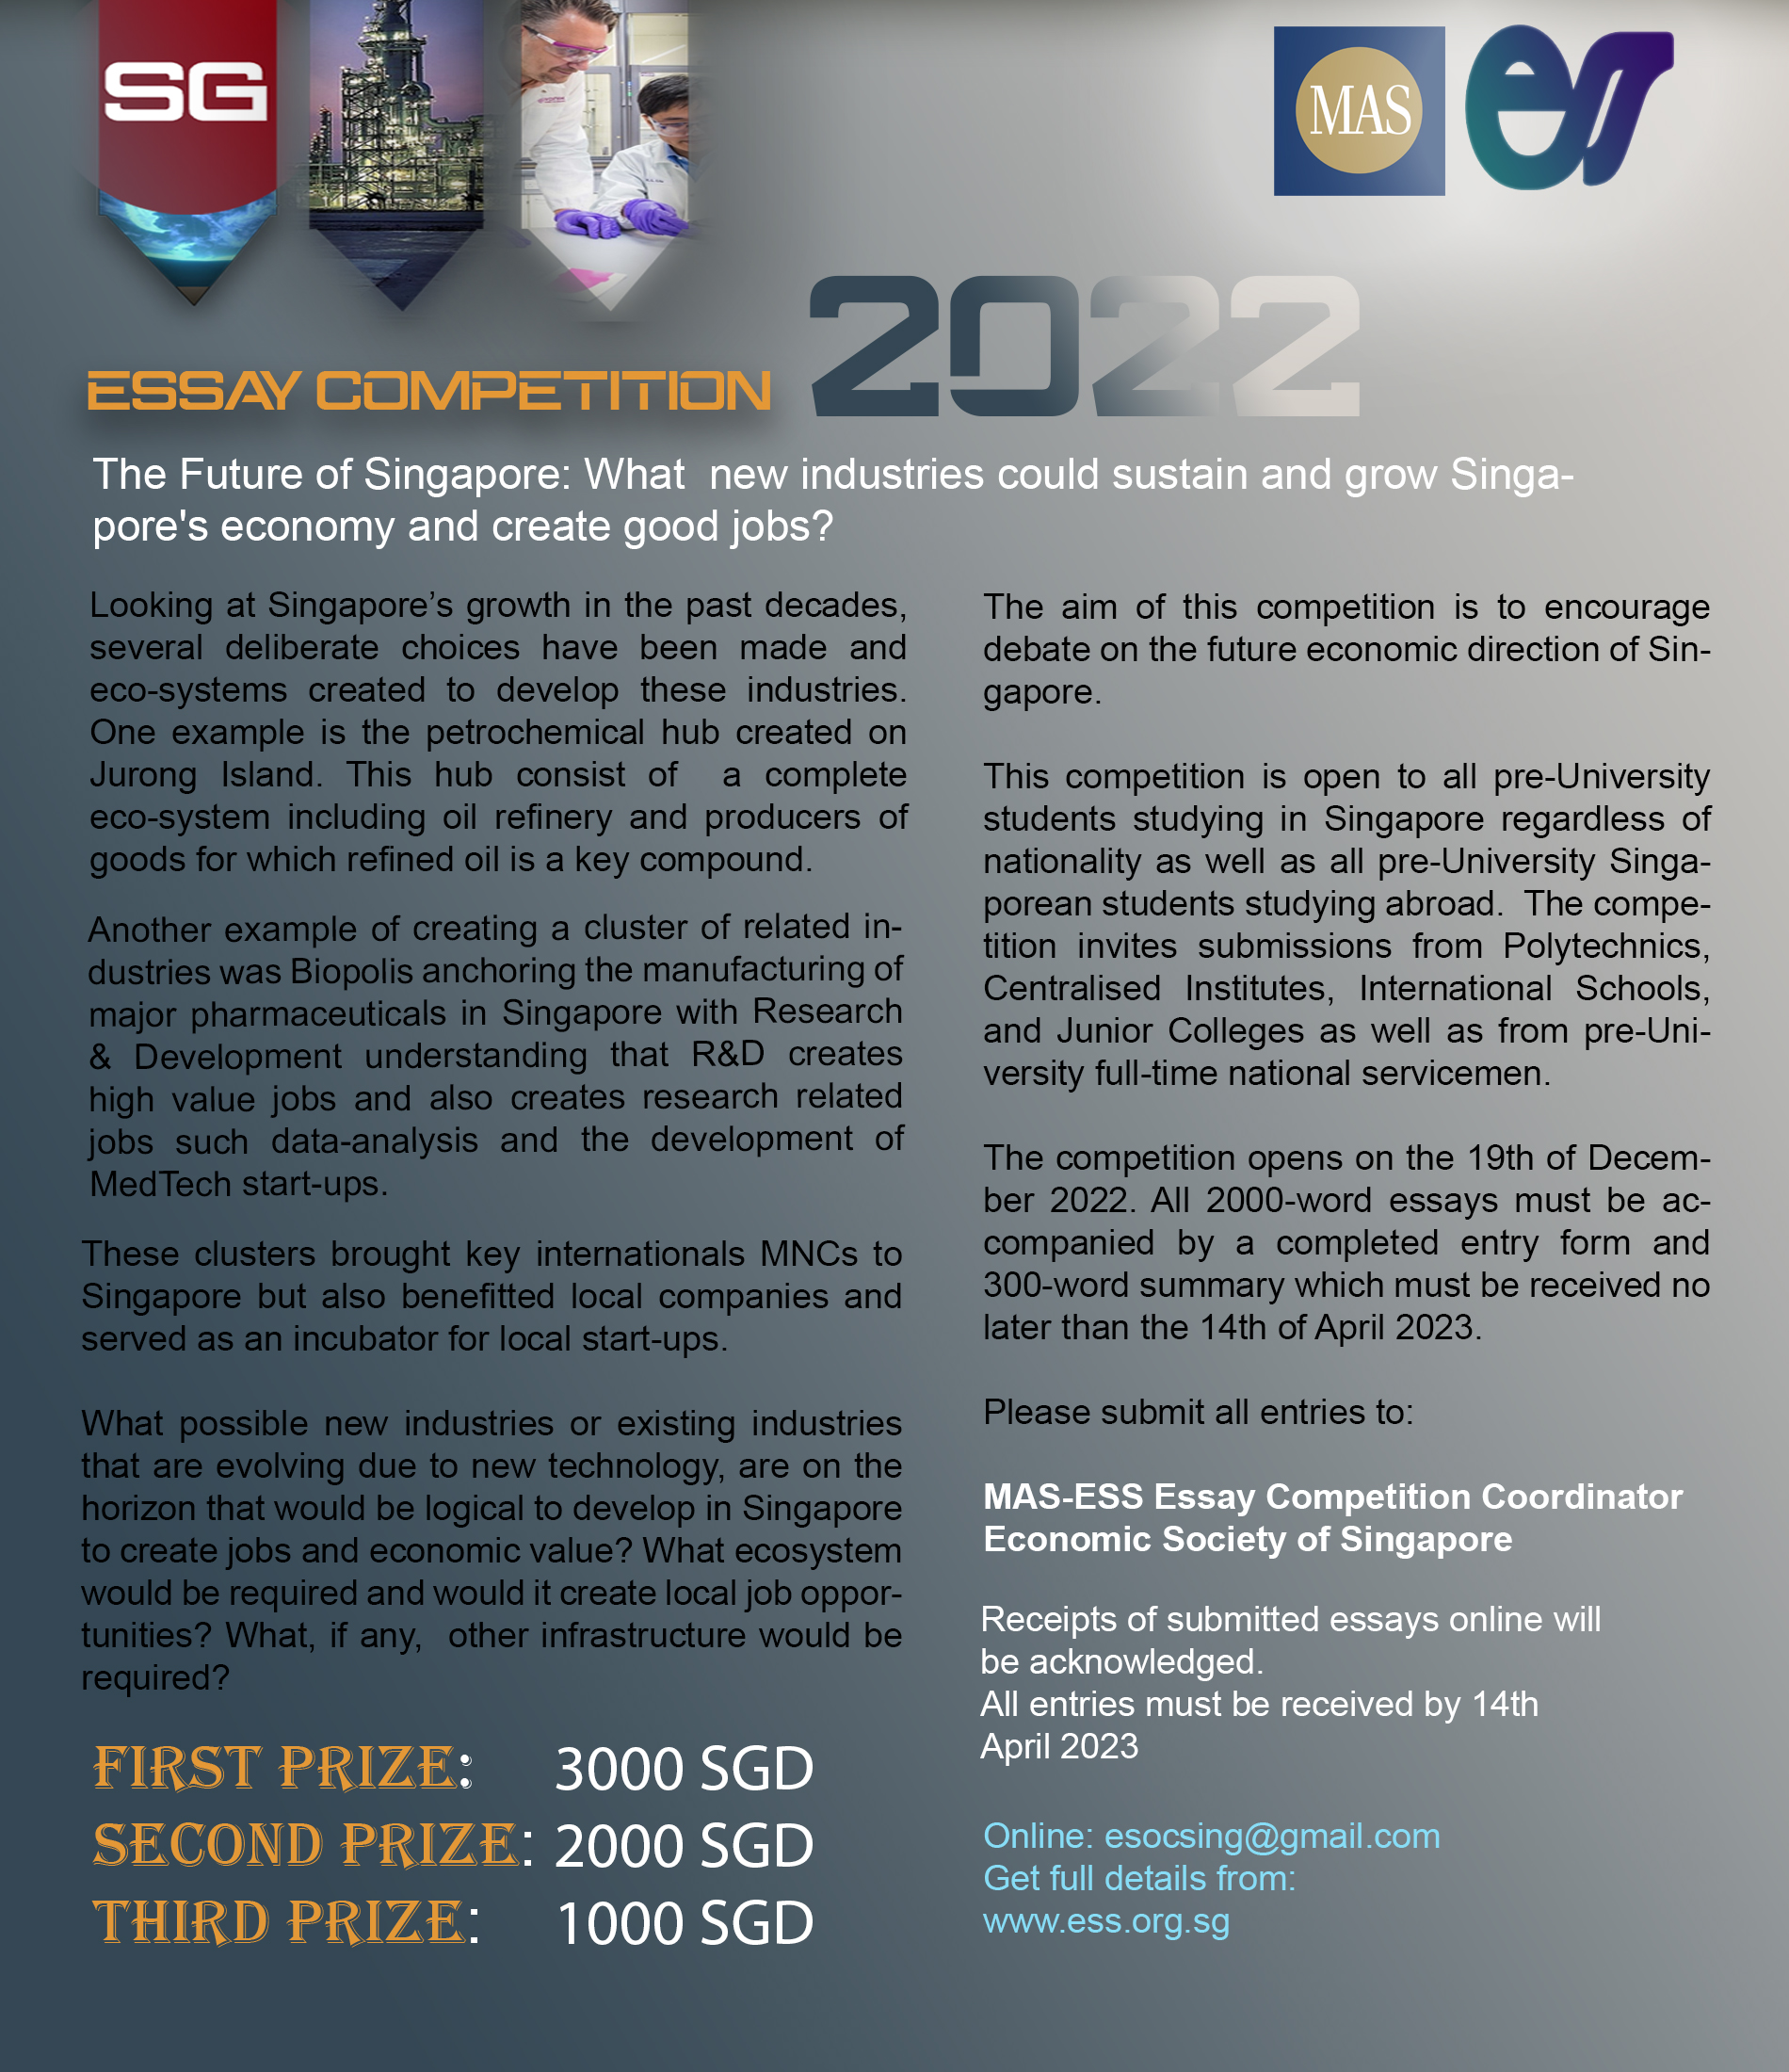 MAS-ESS Essay Competition: “The Future of Singapore: What new industries could sustain and grow Singapore’s economy and create good jobs?”